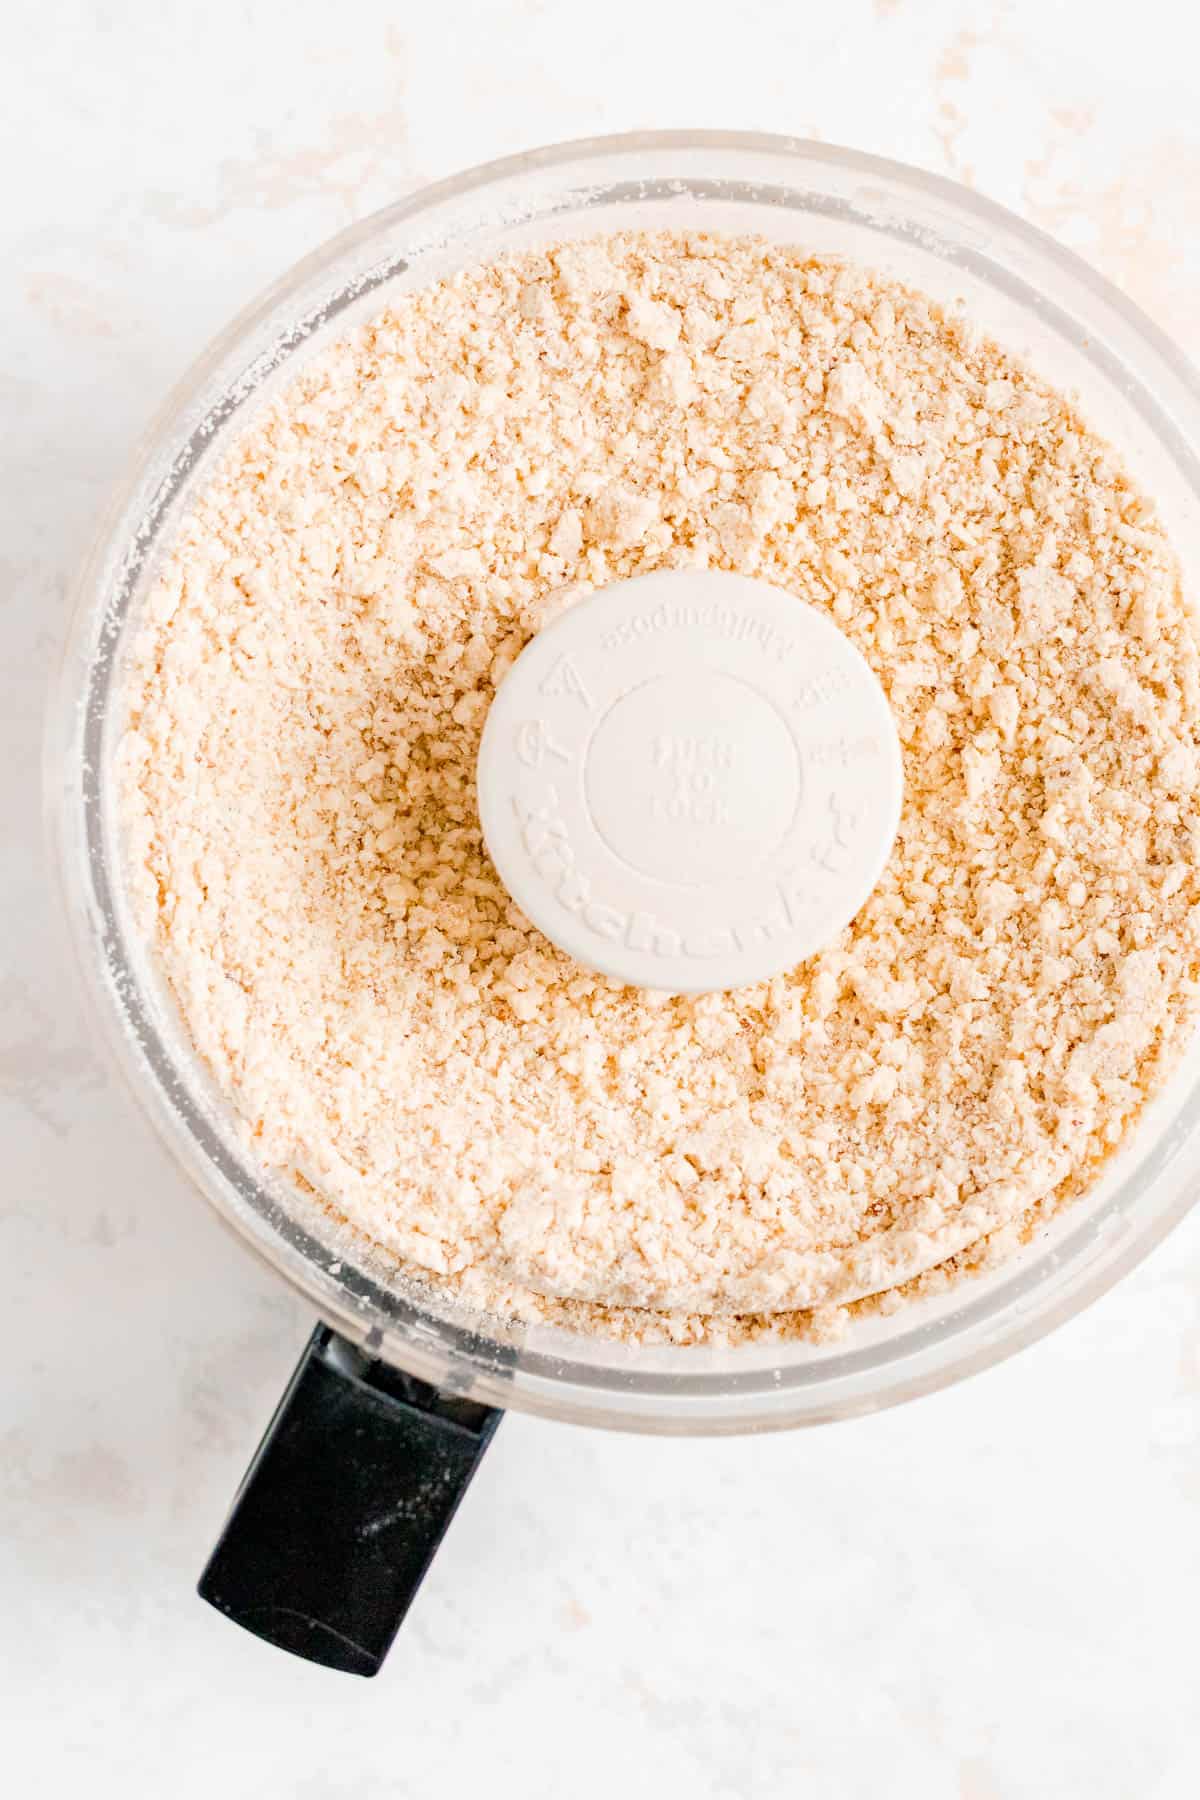 dry ingredients, nuts, and cold butter blended together into crumbs in a food processor bowl